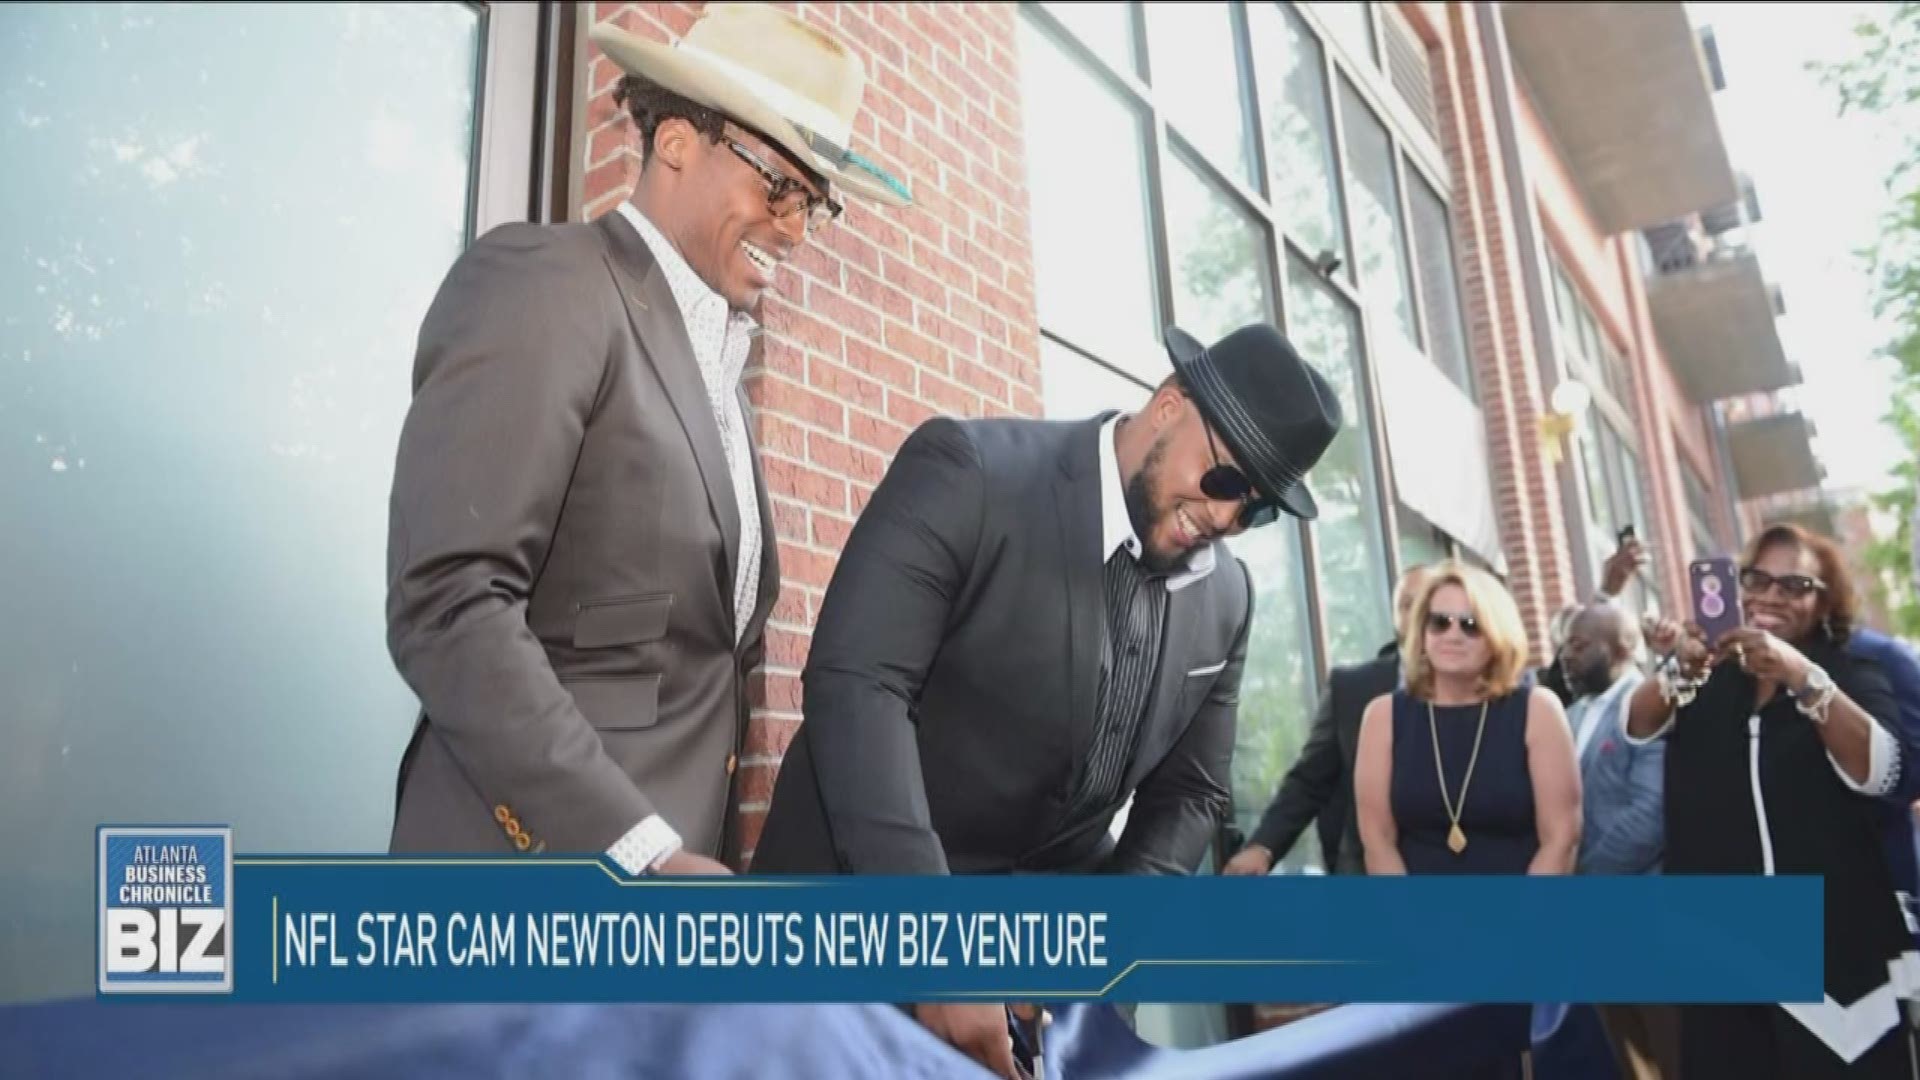 Carolina Panthers quarterback Cam Newton just opened cigar bar and dinner club Fellowship in Castleberry Hill. Get your top business headlines on 'Atlanta Business Chronicle's BIZ' on 11Alive.